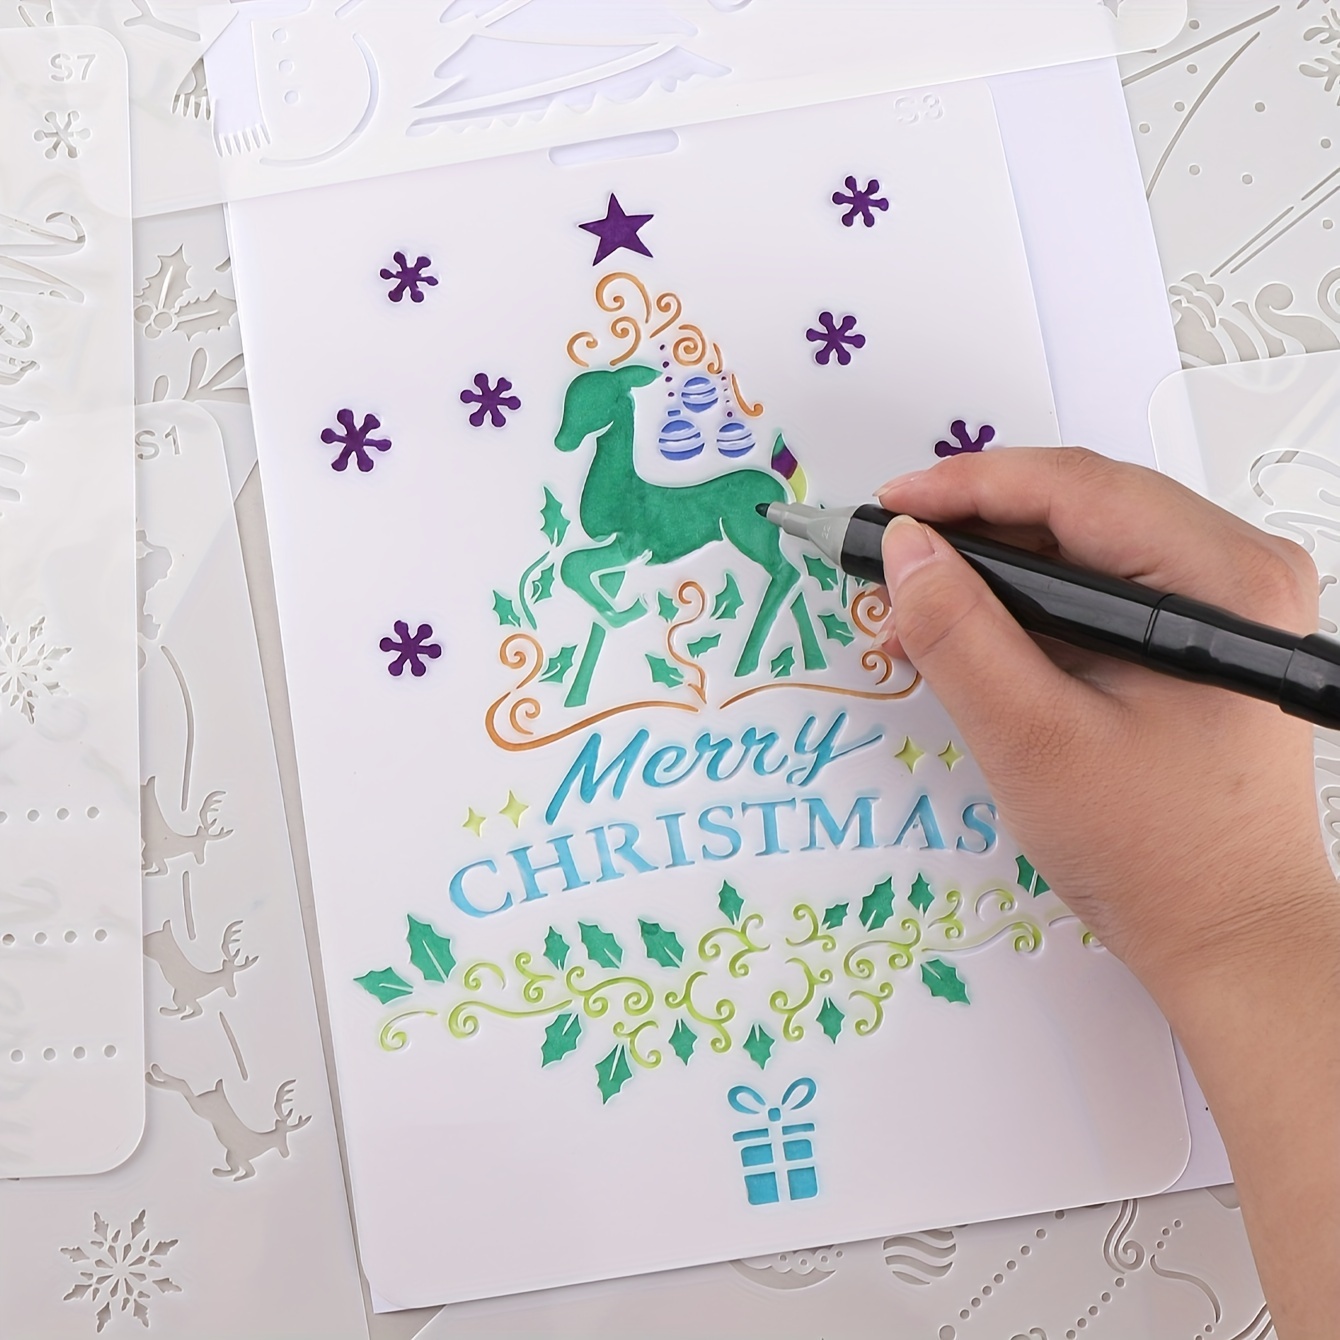 Drawing Stencils for Kids (8 pcs) // CHRISTMAS